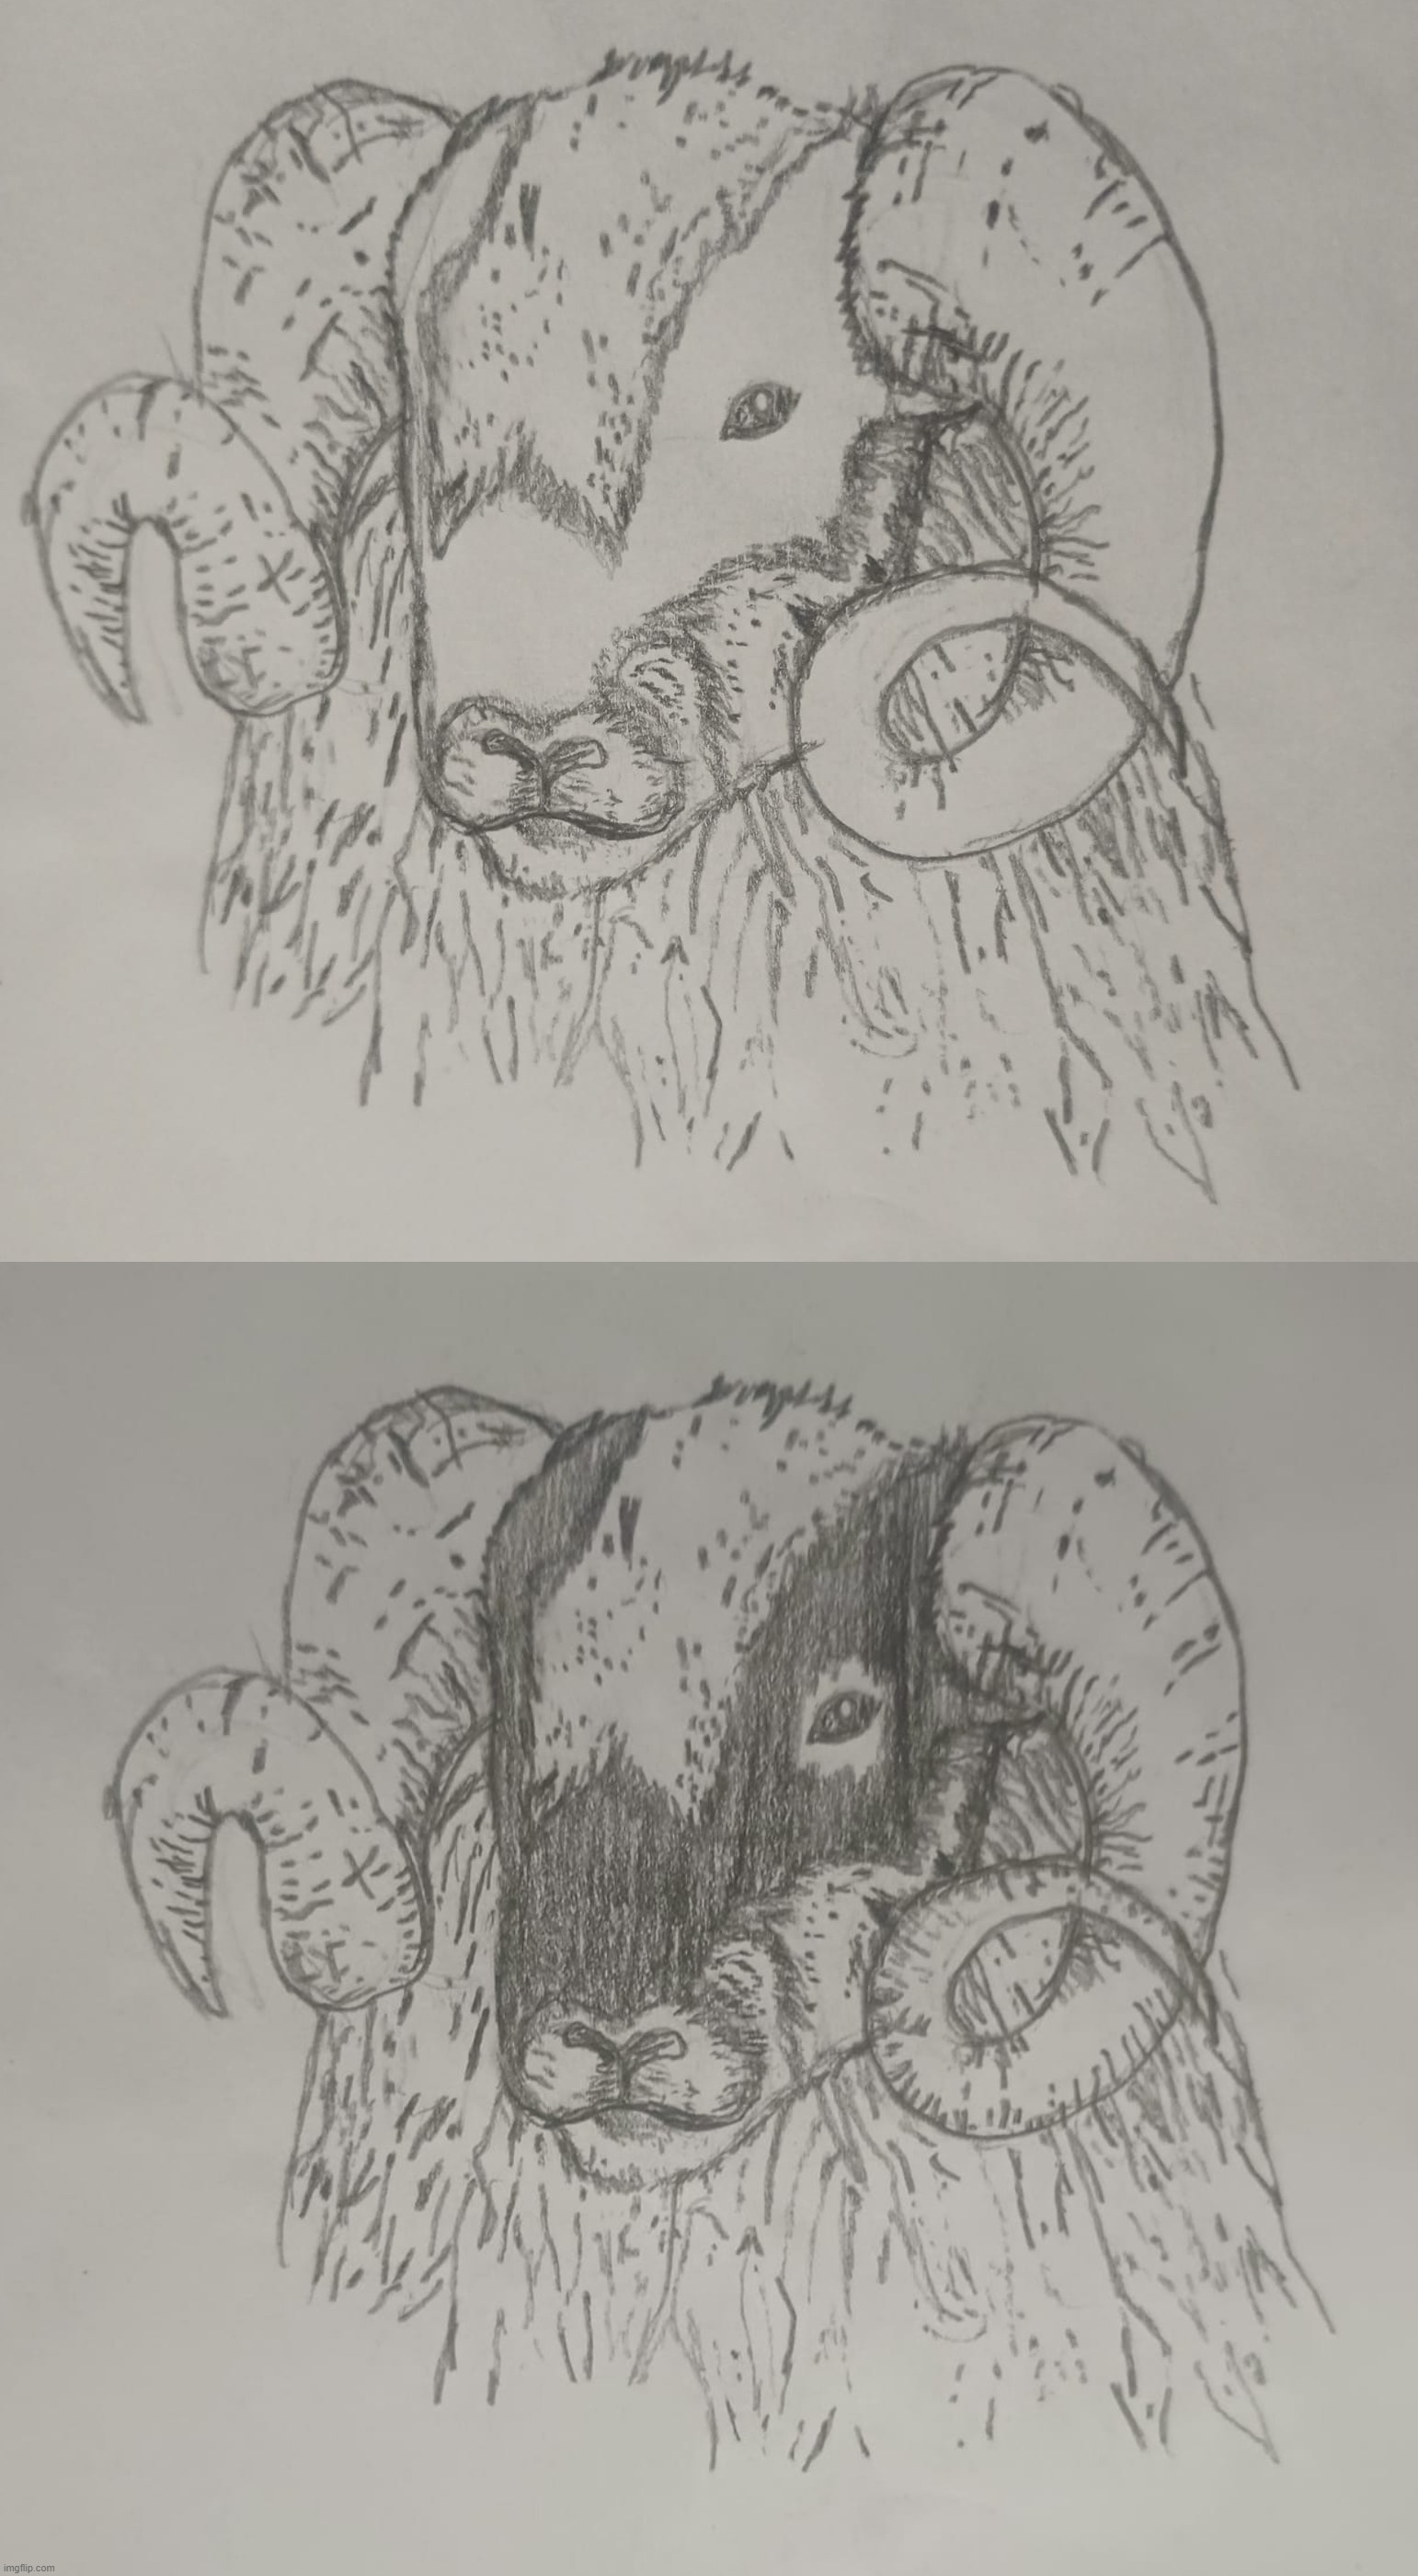 Practice Rams | image tagged in drawing,practice,sheep,ram,pencil | made w/ Imgflip meme maker